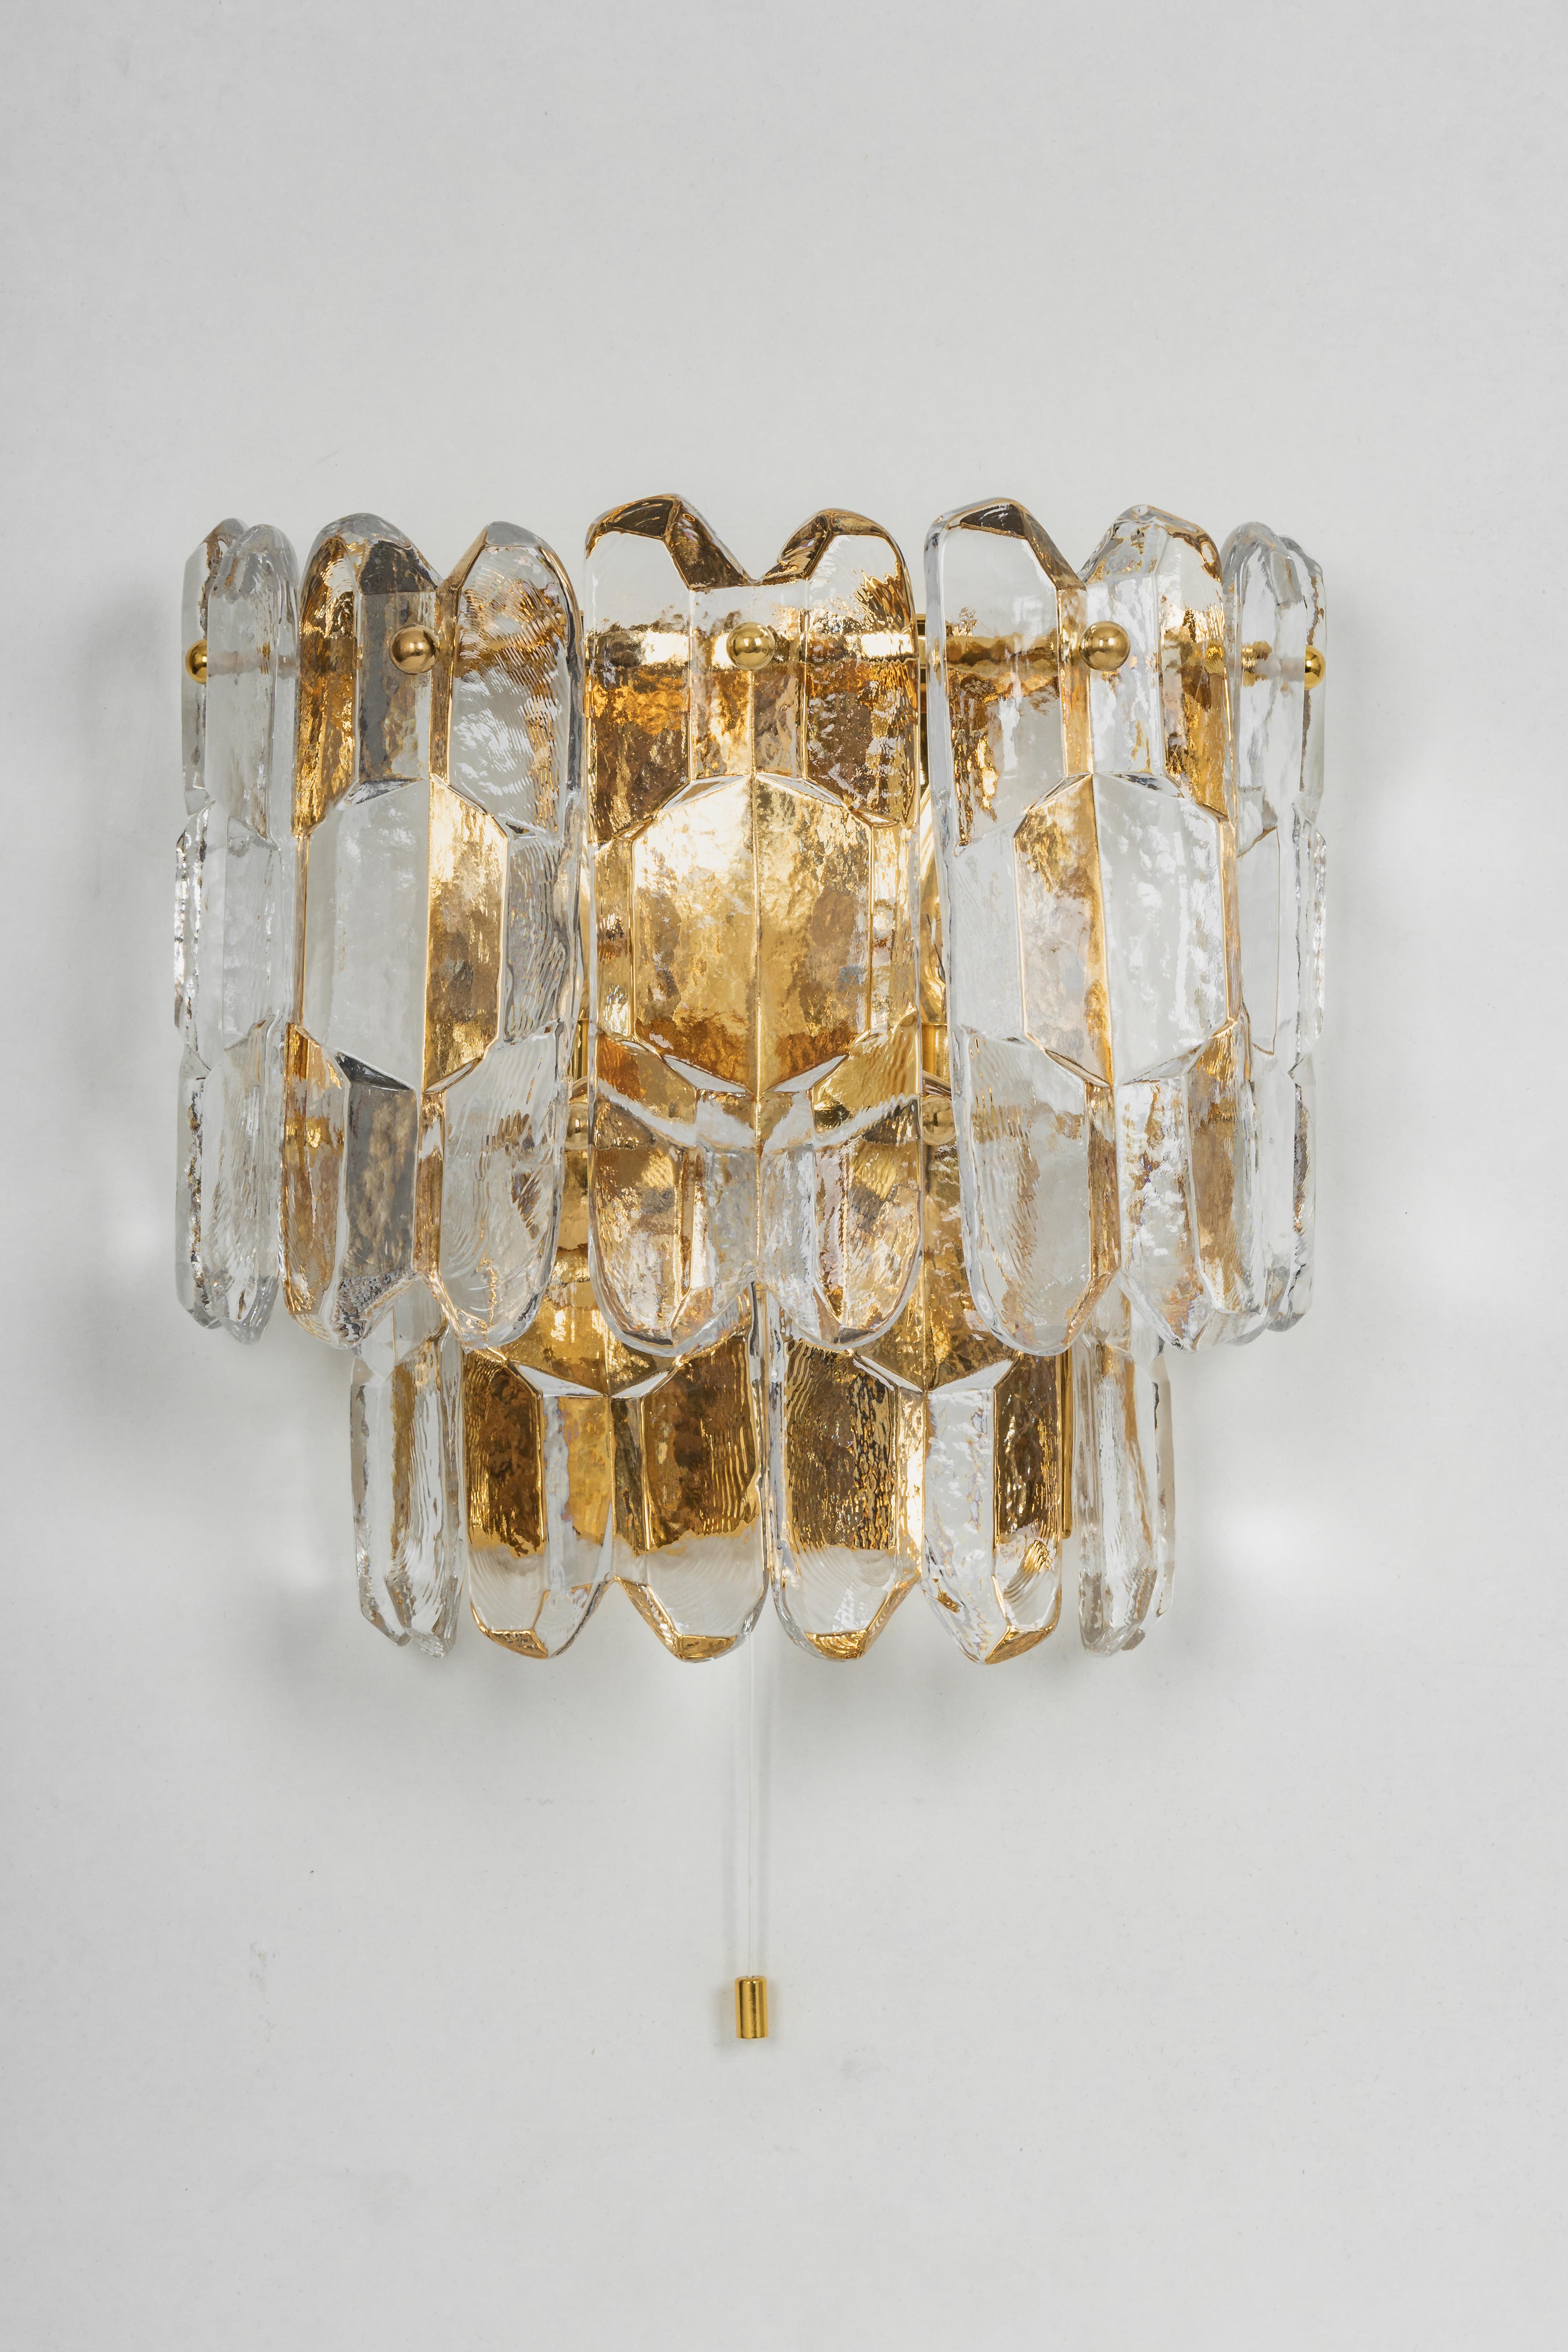 Wonderful pair of midcentury wall sconces with nine murano glass pieces, made by Kalmar, Austria, manufactured, circa 1960-1969.

High quality and in very good condition. Cleaned, well-wired and ready to use. 

Each fixture requires 3 x E14